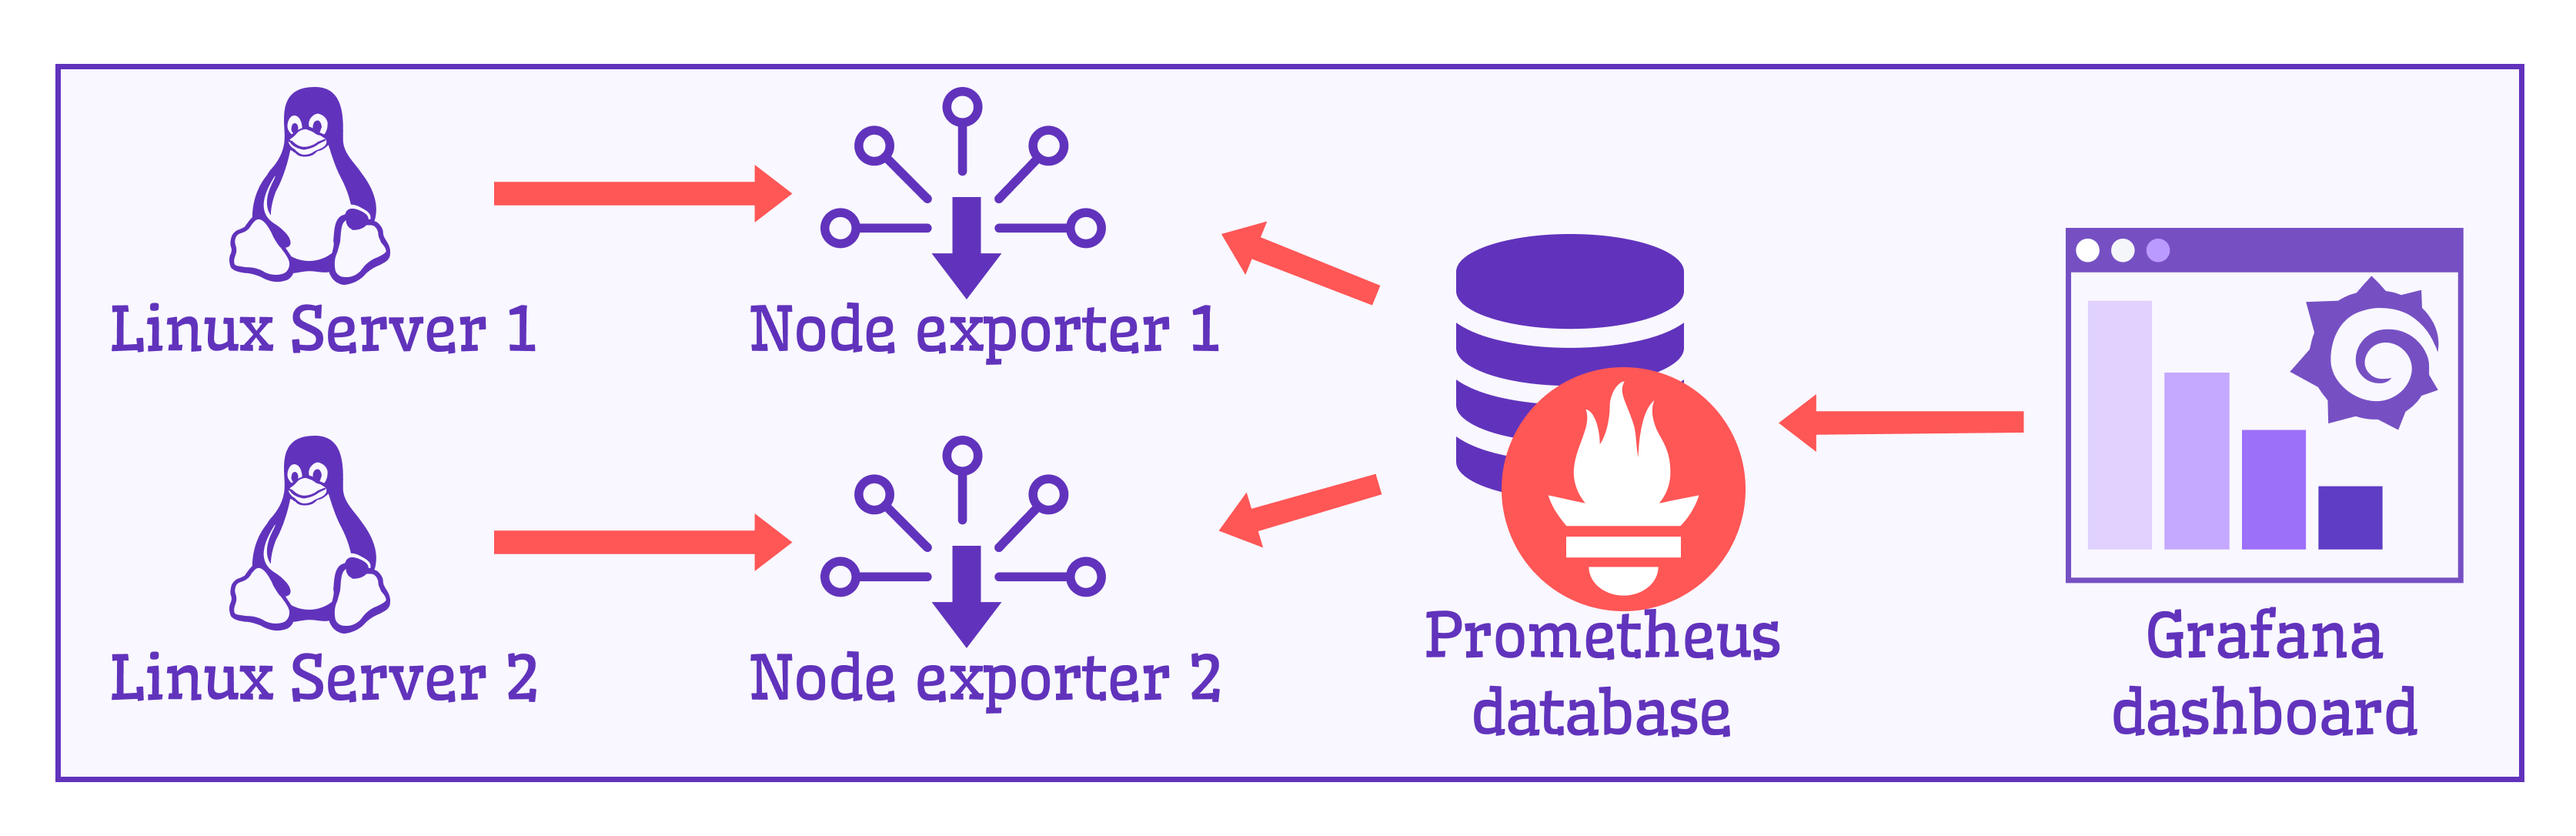 Node exporters collect data to store in Prometheus and then display in Grafana dashboard.